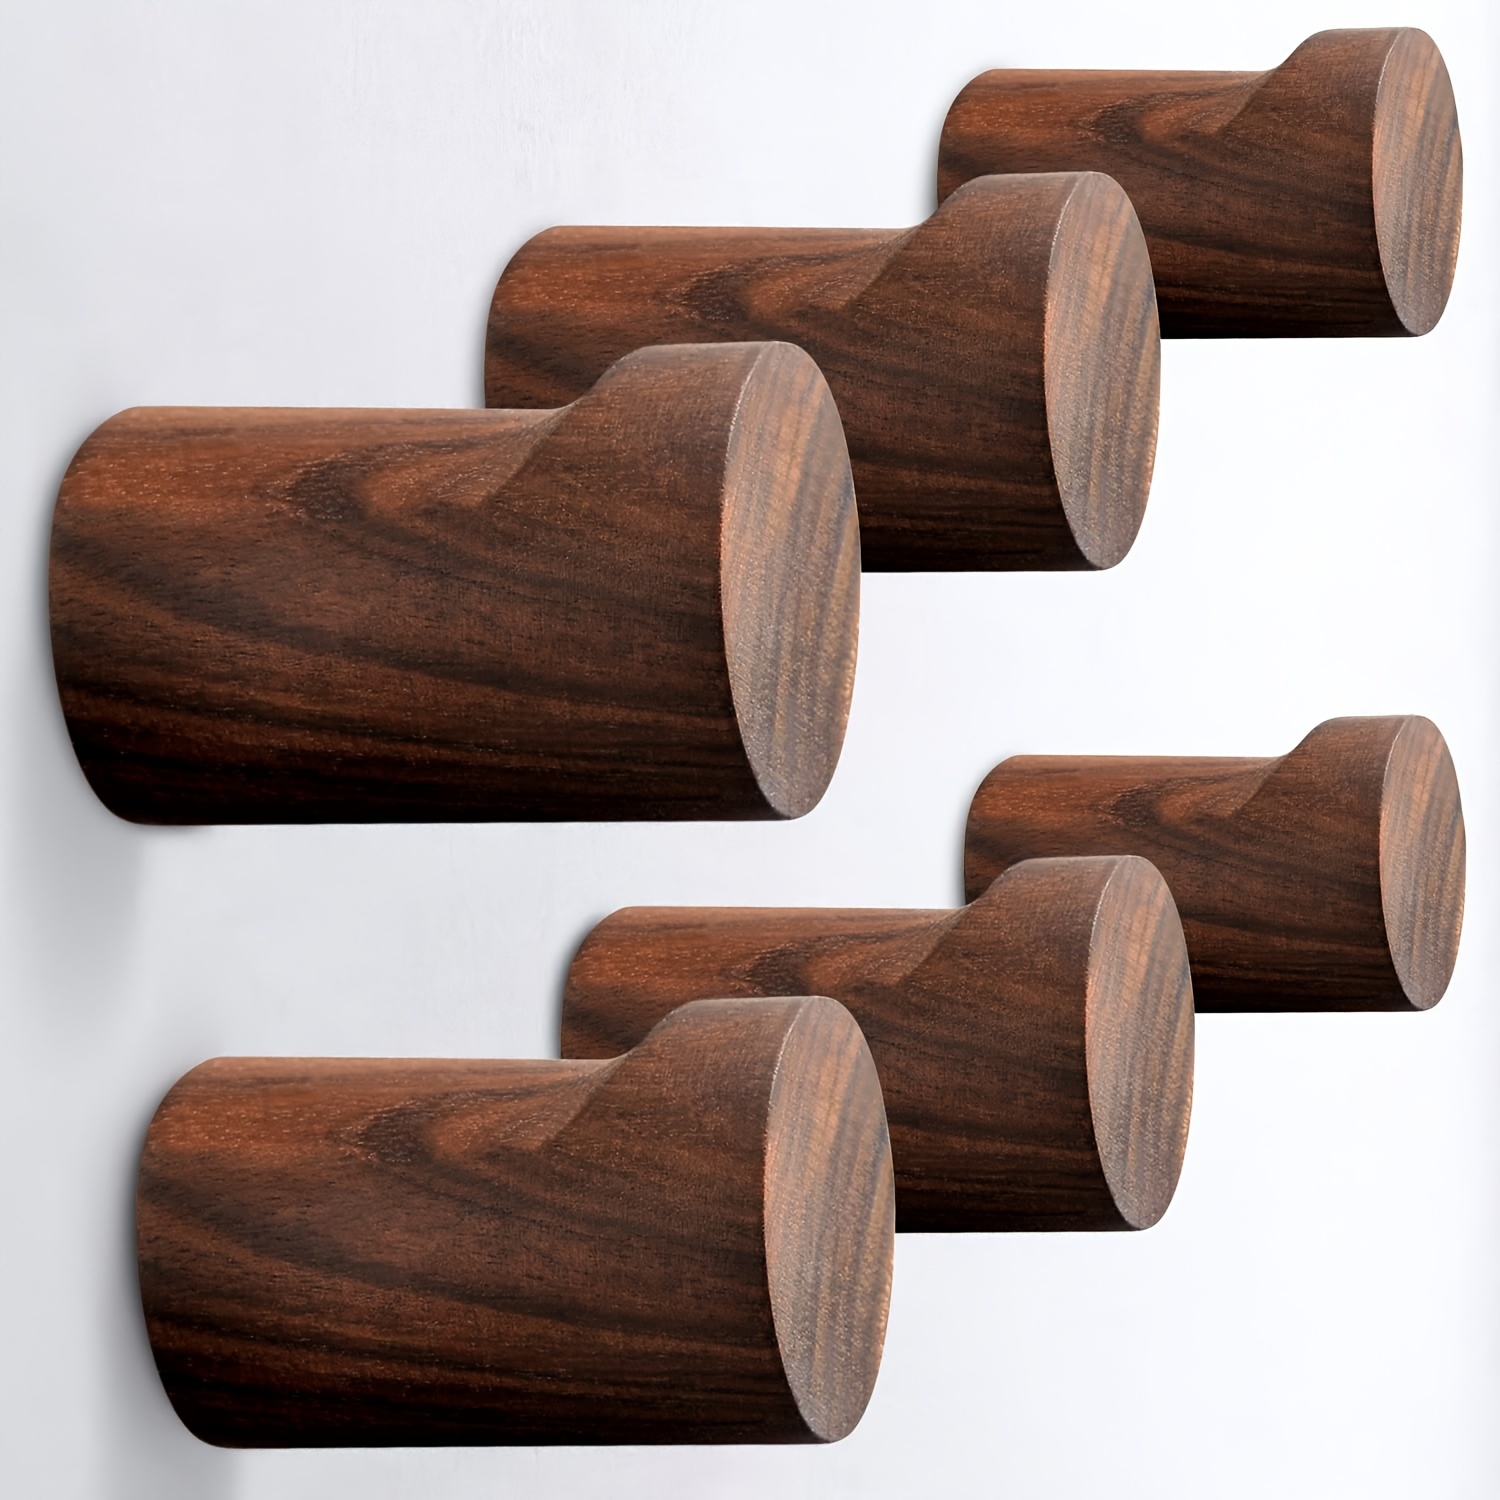 4 Pack Wooden Wall Hooks - Wall-Mounted Natural Wood Coat Hangers Simple  Modern Handmade Minimalist Home Decor Wooden Pegs for Hanging Coats Hats  Bags